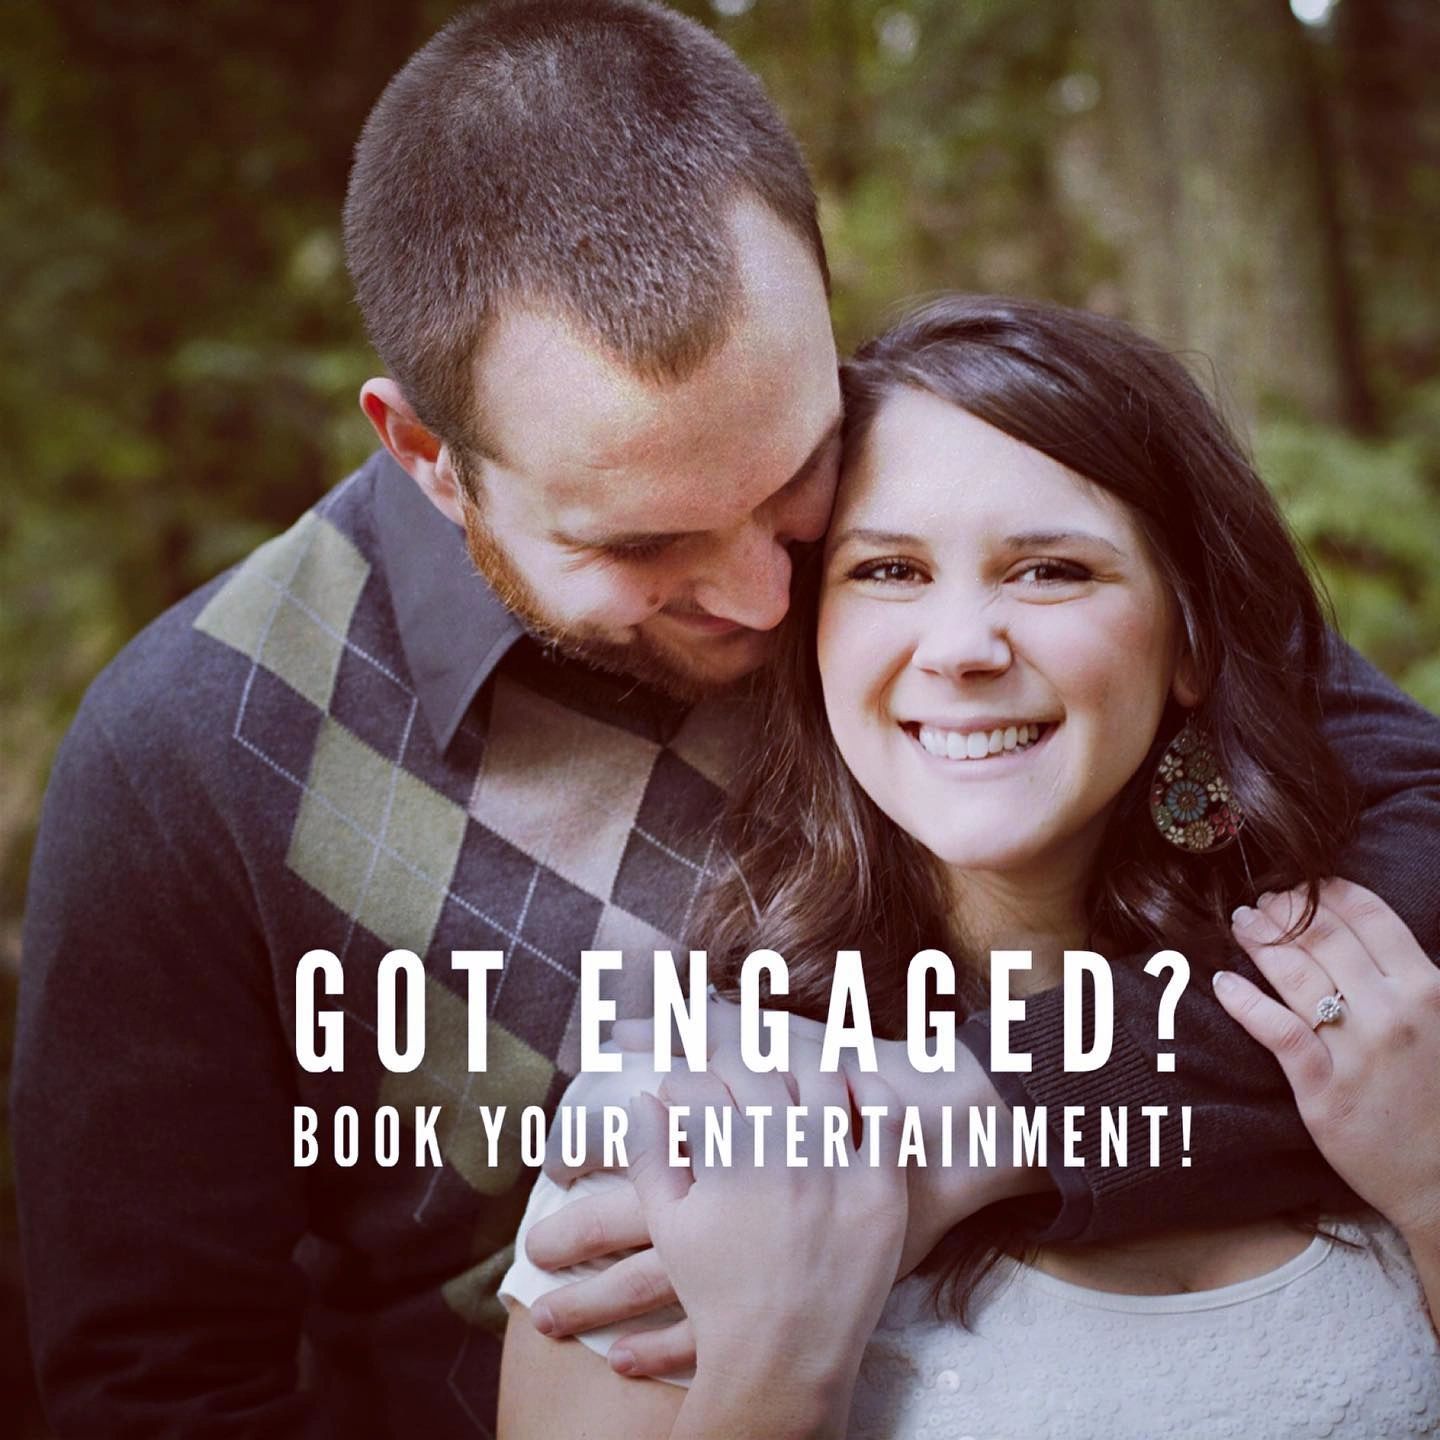 Got Engaged? Let's Talk Entertainment and book the package that best fits your needs.